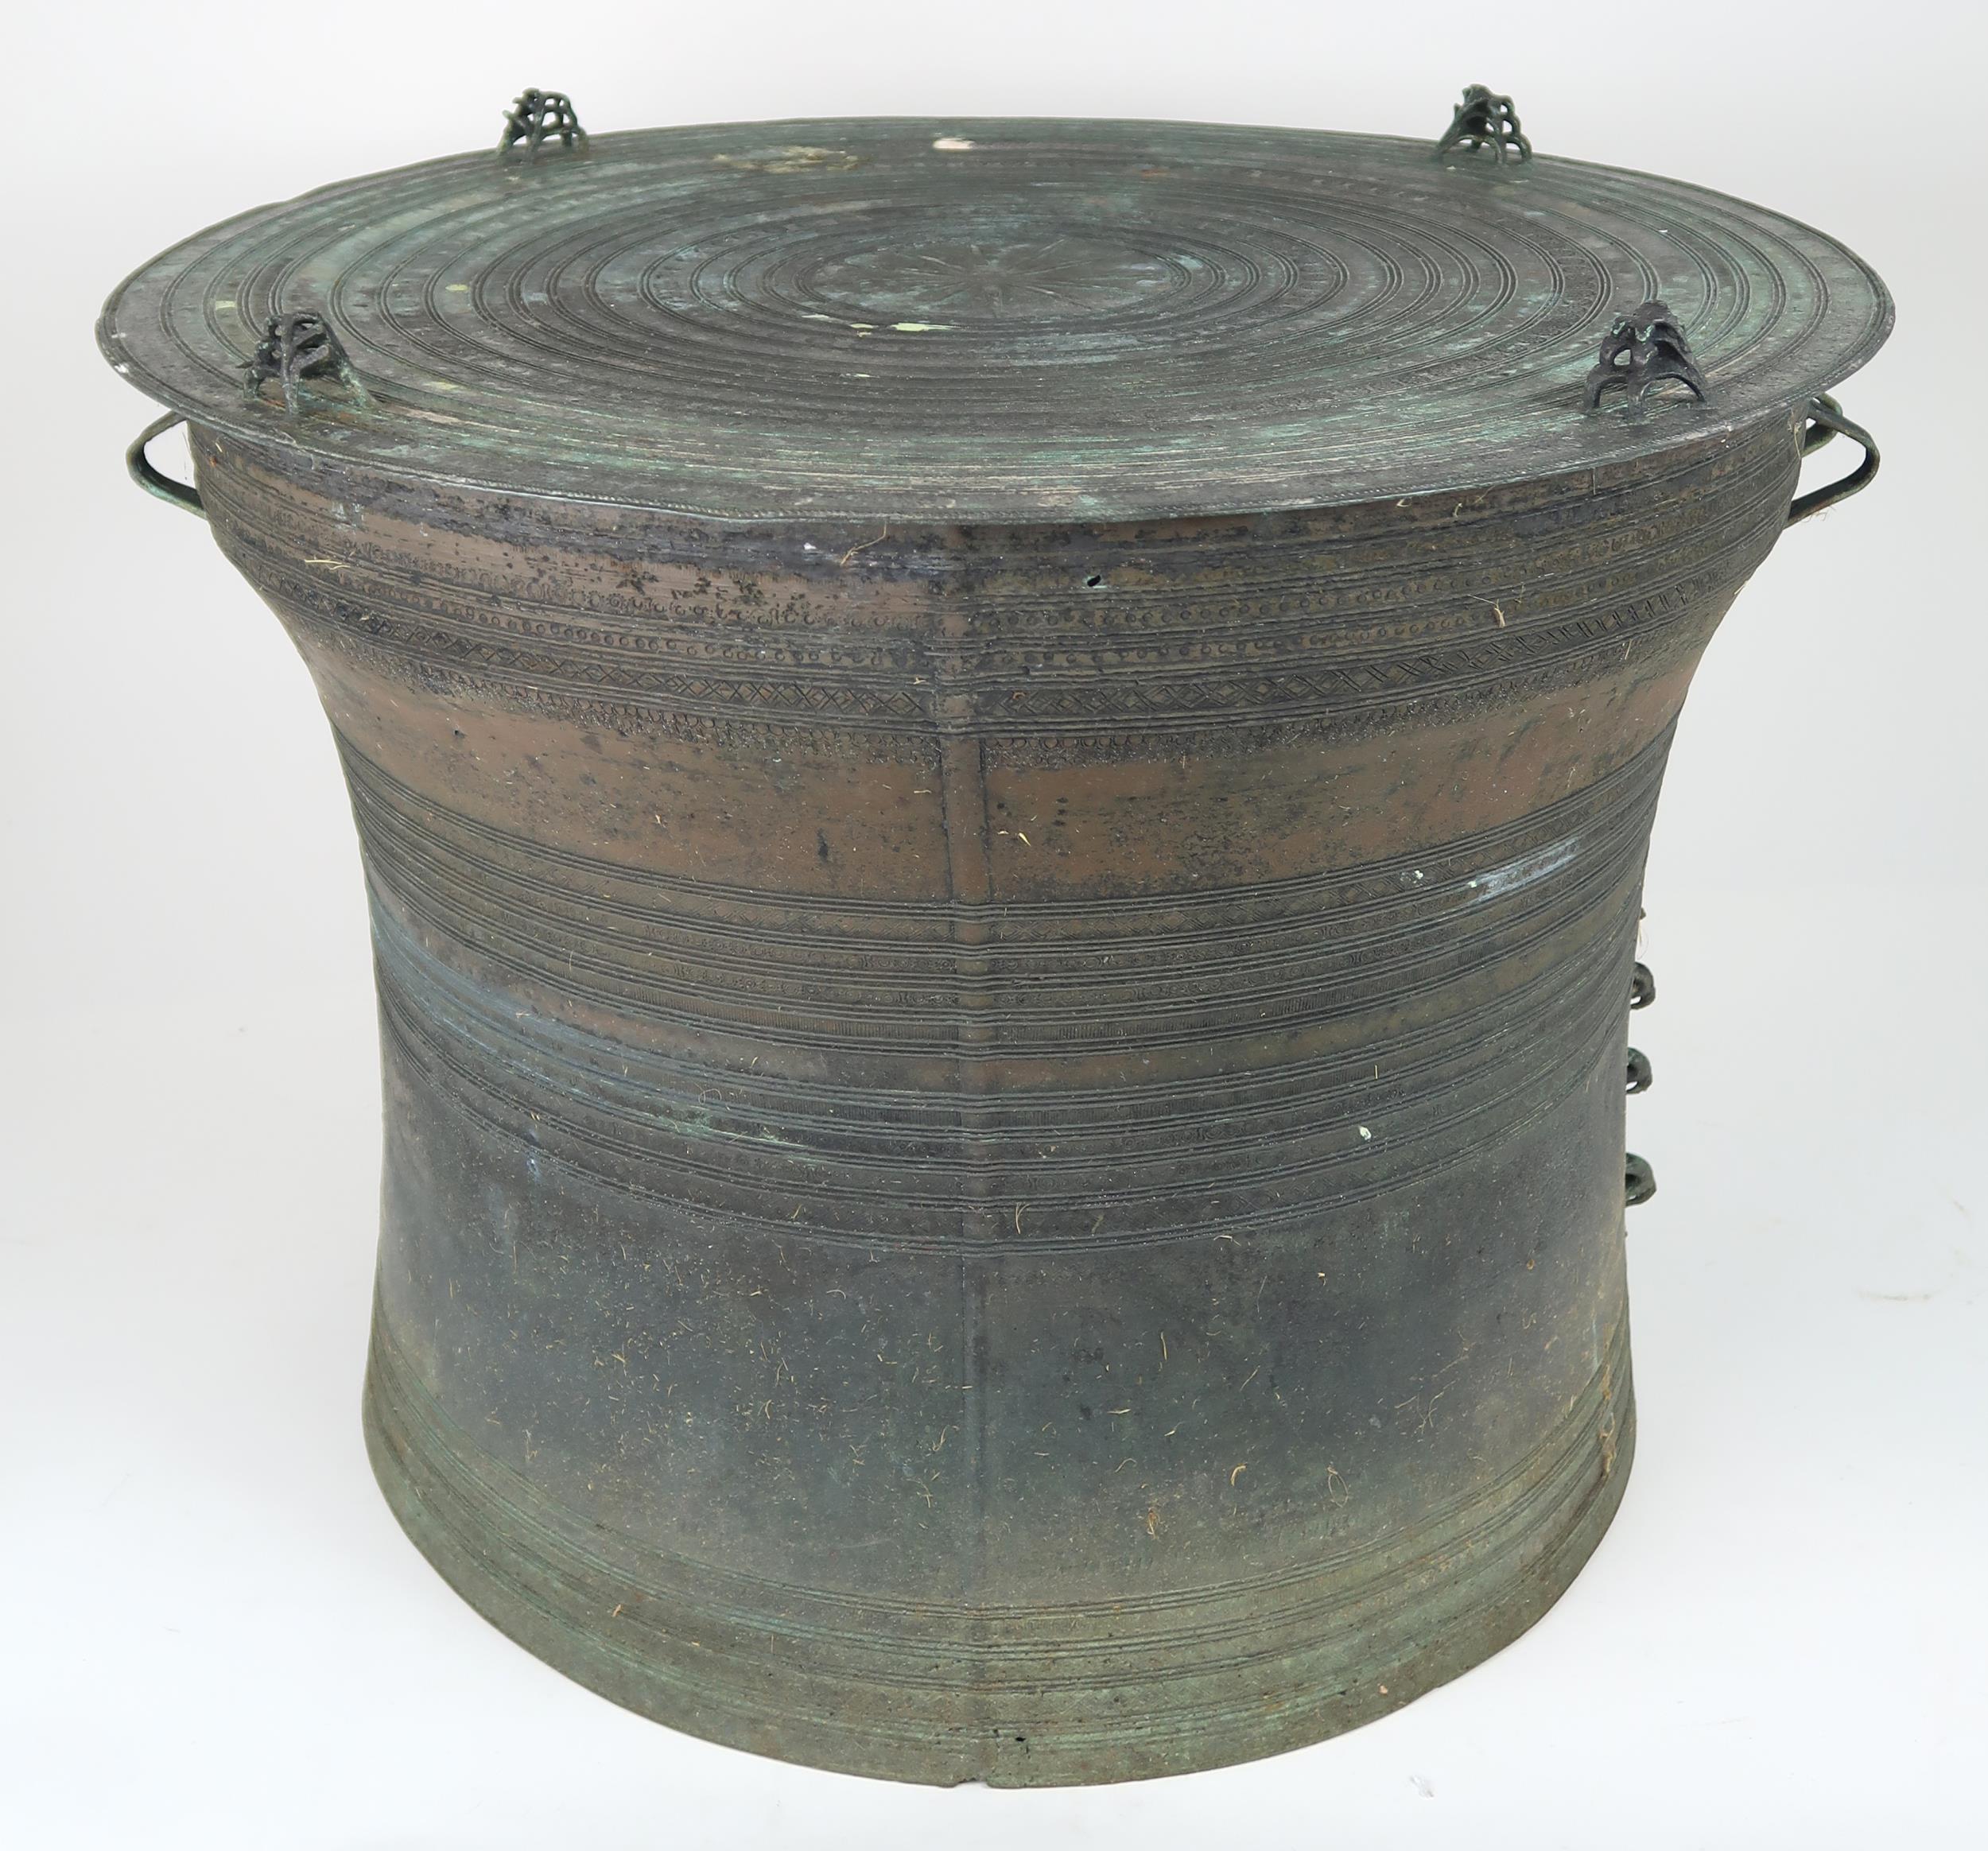 A LAOTIAN BRONZE RAIN DRUM  Of traditional type, with applied animals to top and pierced strap